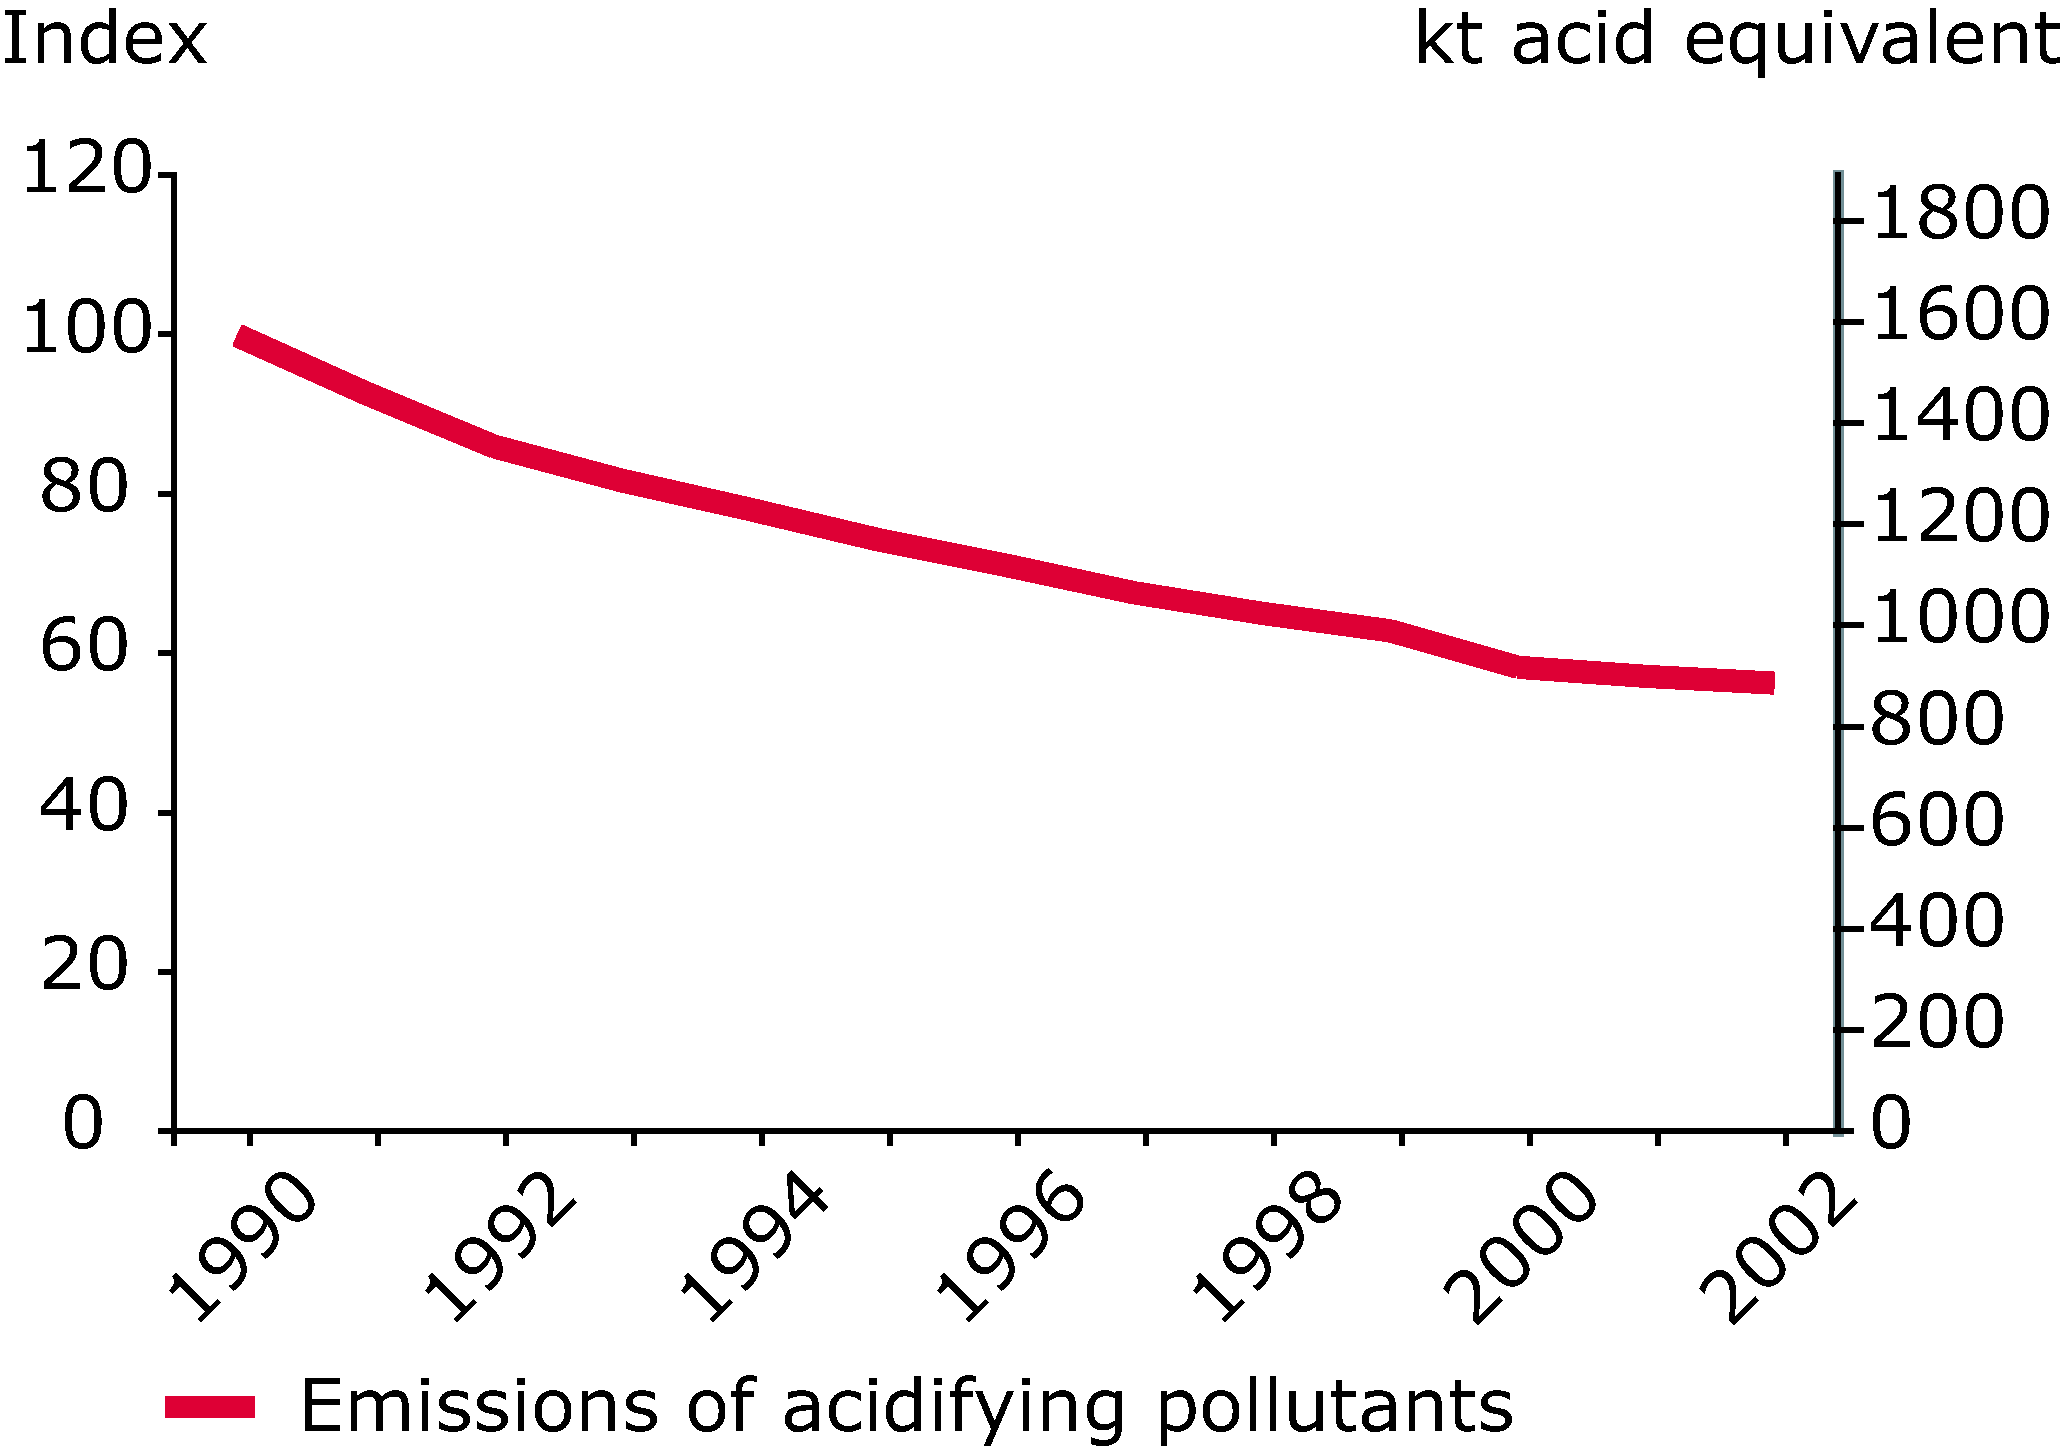 Emission trends of acidifying pollutants (EEA member countries), 1990-2002